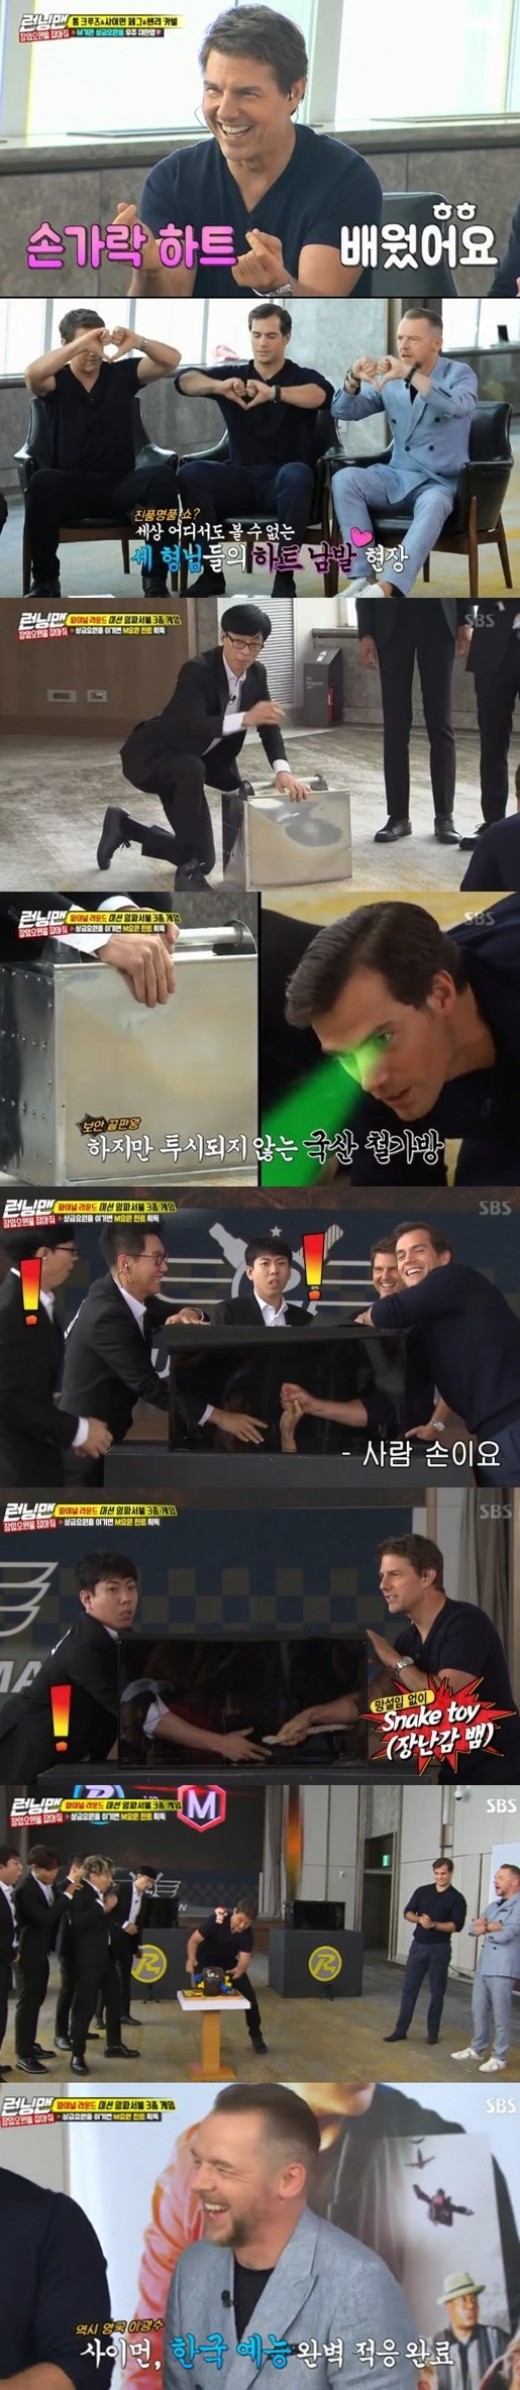 SBS Running Man topped the double-digit ratings and ranked first in the same time zone entertainment ratings.According to Nielsen Korea, a ratings agency on the 23rd, Running Man, which aired on the 22nd, recorded an average audience rating of 7.1% and a second part of 10% (based on households in the Seoul metropolitan area), beating MBC Masked Wang (9.7%) and KBS2 Happy Sunday (8.2%).In particular, Running Mans double-digit ratings are the second highest ratings this year, only four months after March.In addition, the target audience rating of 20-49 years old (hereinafter referred to as 2049), which is considered an important indicator of major advertising officials, also soared to 5.7%, lightly beating Happy Sunday (4.1%) and Masked Wang (2.6%) which were broadcast on the same time zone.The figure is the record of the 2049 rating TOP 3 throughout the entertainment/culture program broadcast on the day.On the day of the show, Tom Cruise, Henry Carville and Simon Pegg, the actors of the movie Mission Impossible: Fall Out, which became a hot topic only with trailers, appeared in a surprise appearance.Hold me on to Project 2: Hold the infiltrators.Tom Cruise, who was the ninth to visit Korea, said, I am so glad to be able to come out of Running Man. Henry Carville, who visited Korea for the first time, said, I am so excited and excited.Thank you for inviting me. Simon Pegg also enthused the members of Running Man with his unexpected finger heart attack, saying, Im enjoying this time for my second visit to Korea.Tom Cruise and Henry Carville also joined the Heart Attack and created various hearts and laughed.The final match between the members of Running Man and Mission Impossible was held. Although it was a limited recording time, the members of Mission surprised everyone with their Game fighting.In the Iron Bag Quiz, he did not mind lying on the floor, he wrote Trick Operation, and he overpowered the Running Man members with his best efforts in every Game.Tom Cruises Game of Uncle Tong was up to 11.6%, and he took the best one minute.Tom Cruise said, It was a really fun time.The members of Running Man are great, he said, and the members thanked the three actors for presenting the signature name tag of Running Man as a gift.